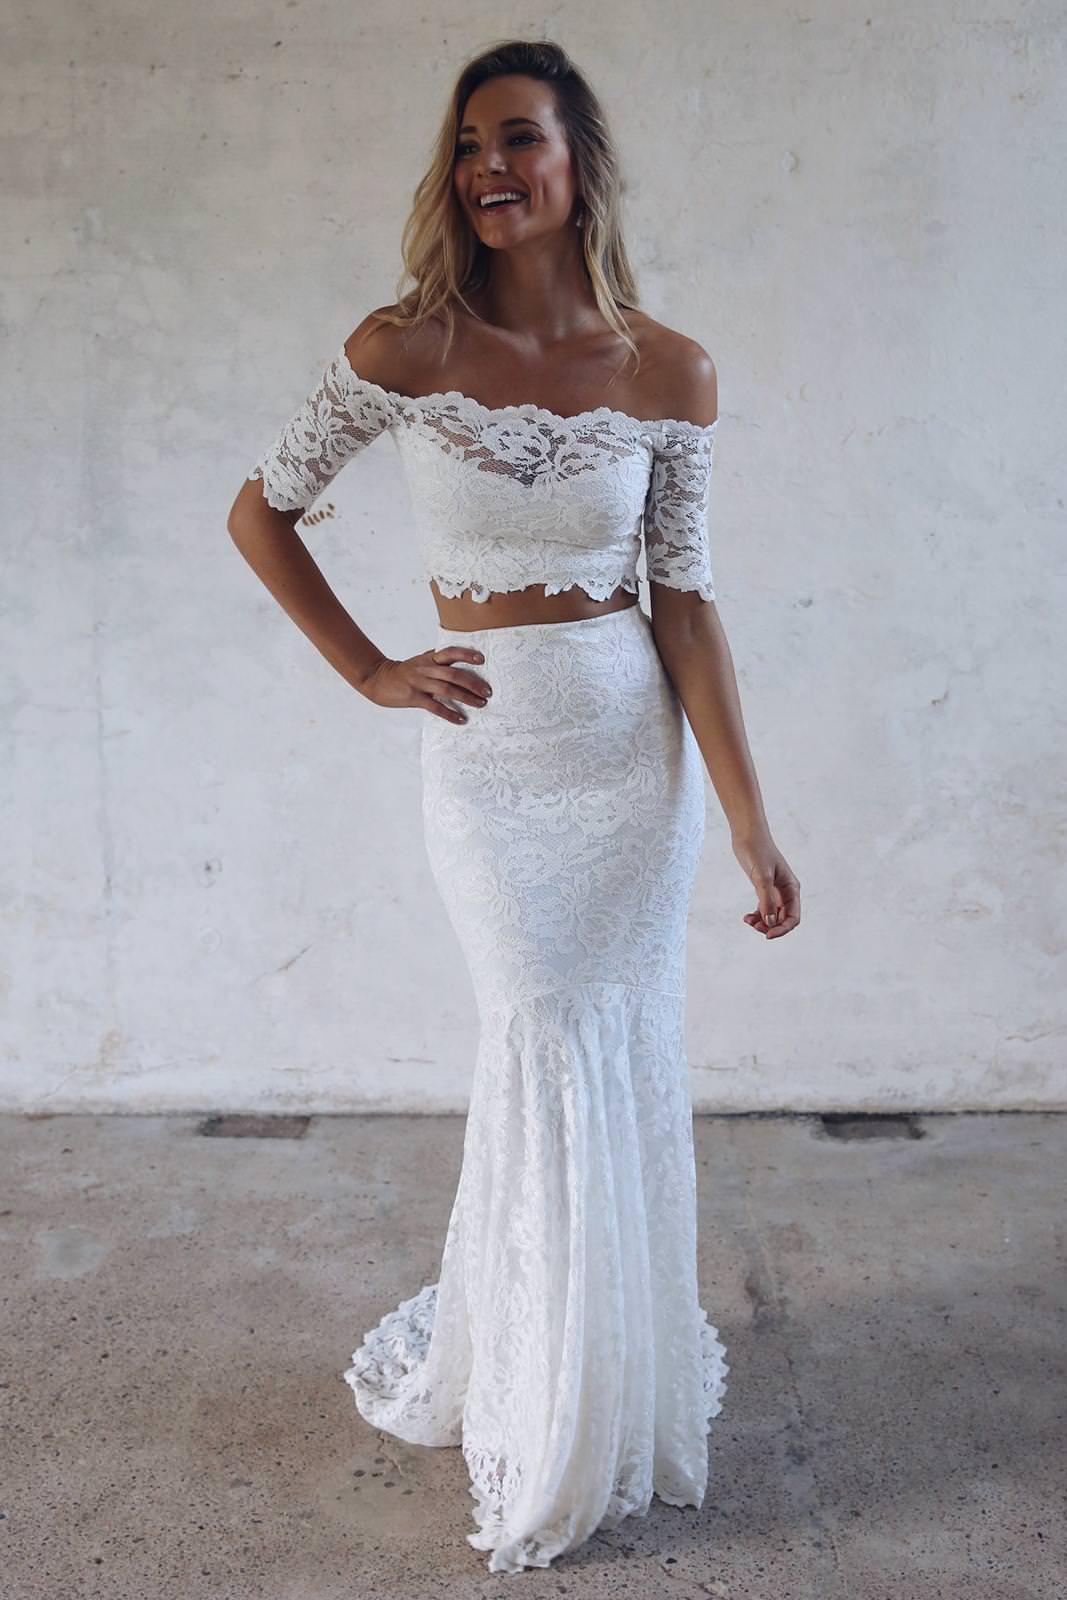 Image of a model wearing a two-piece lace wedding dress